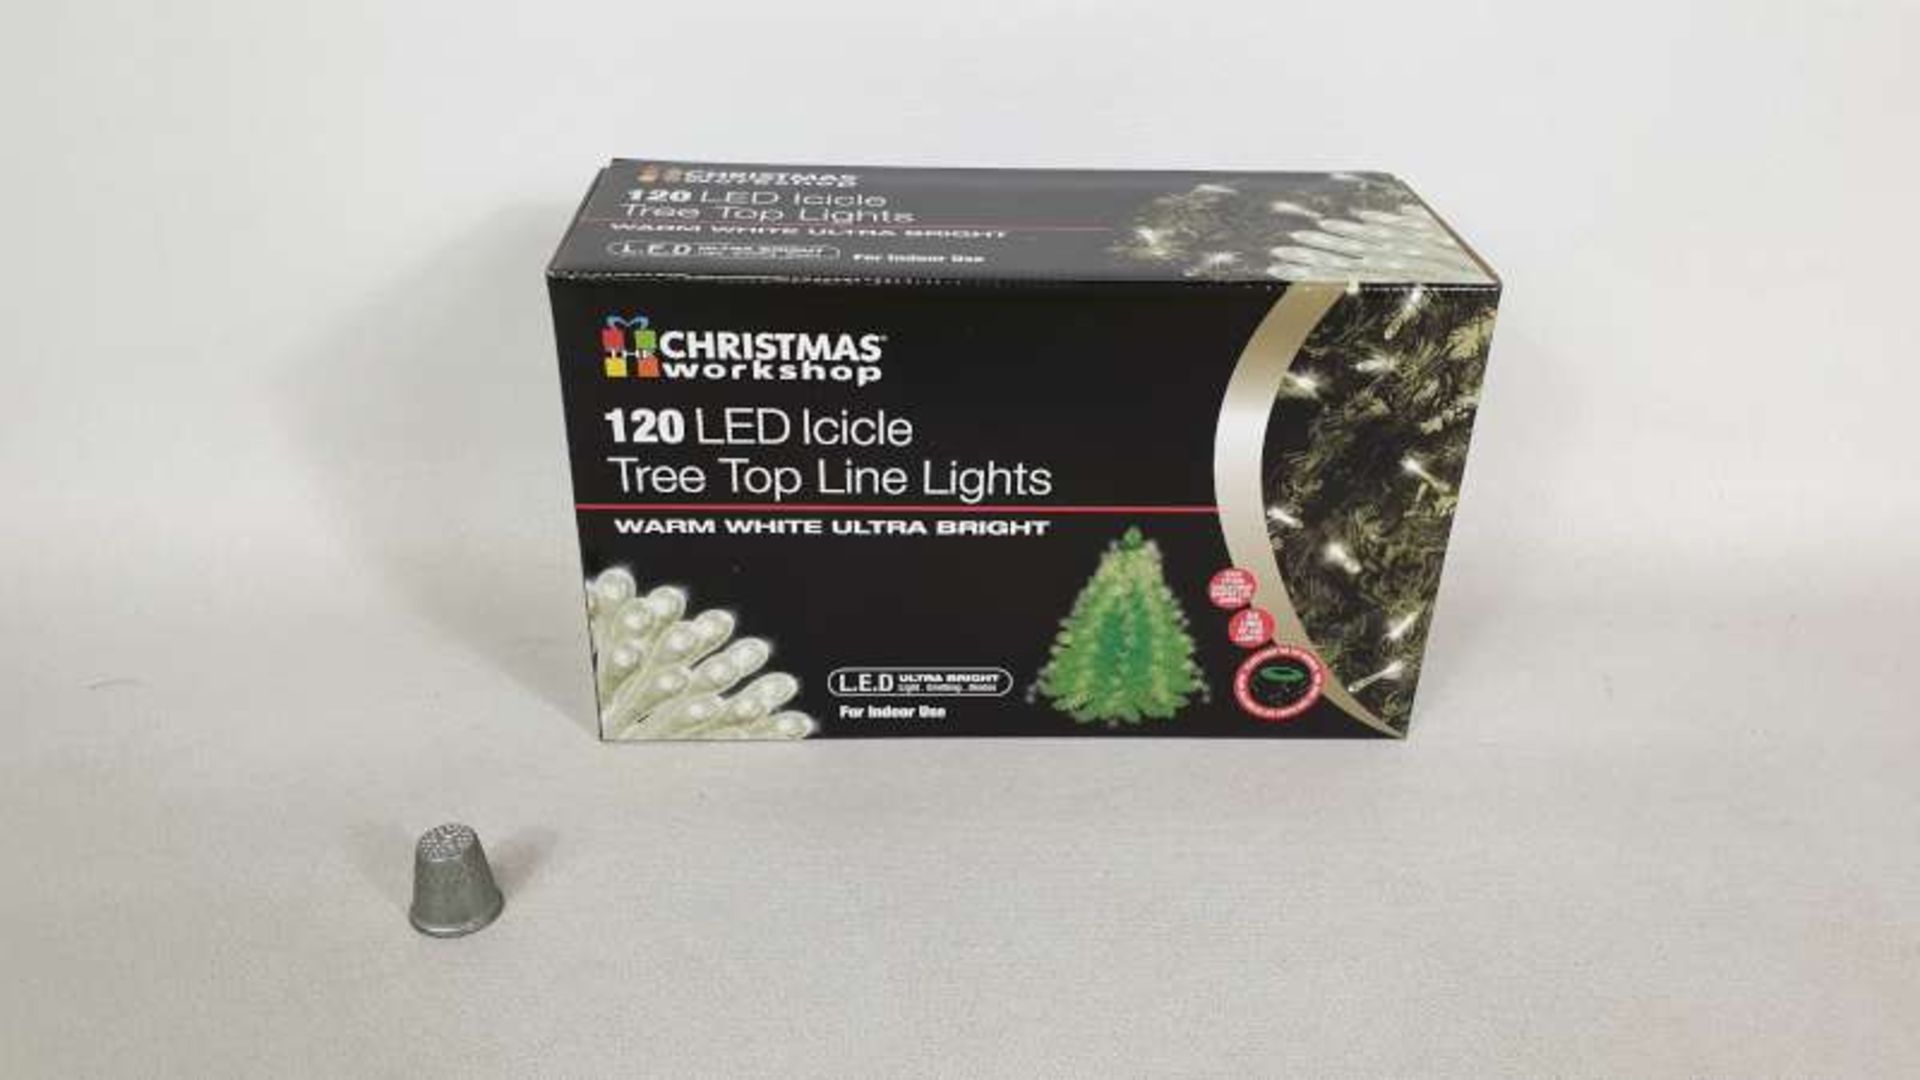 24 X 120 X LED ICICLE WARM WHITE ULTRA BRIGHT COLOURED TREE TOP LINE LIGHTS IN 2 BOXES